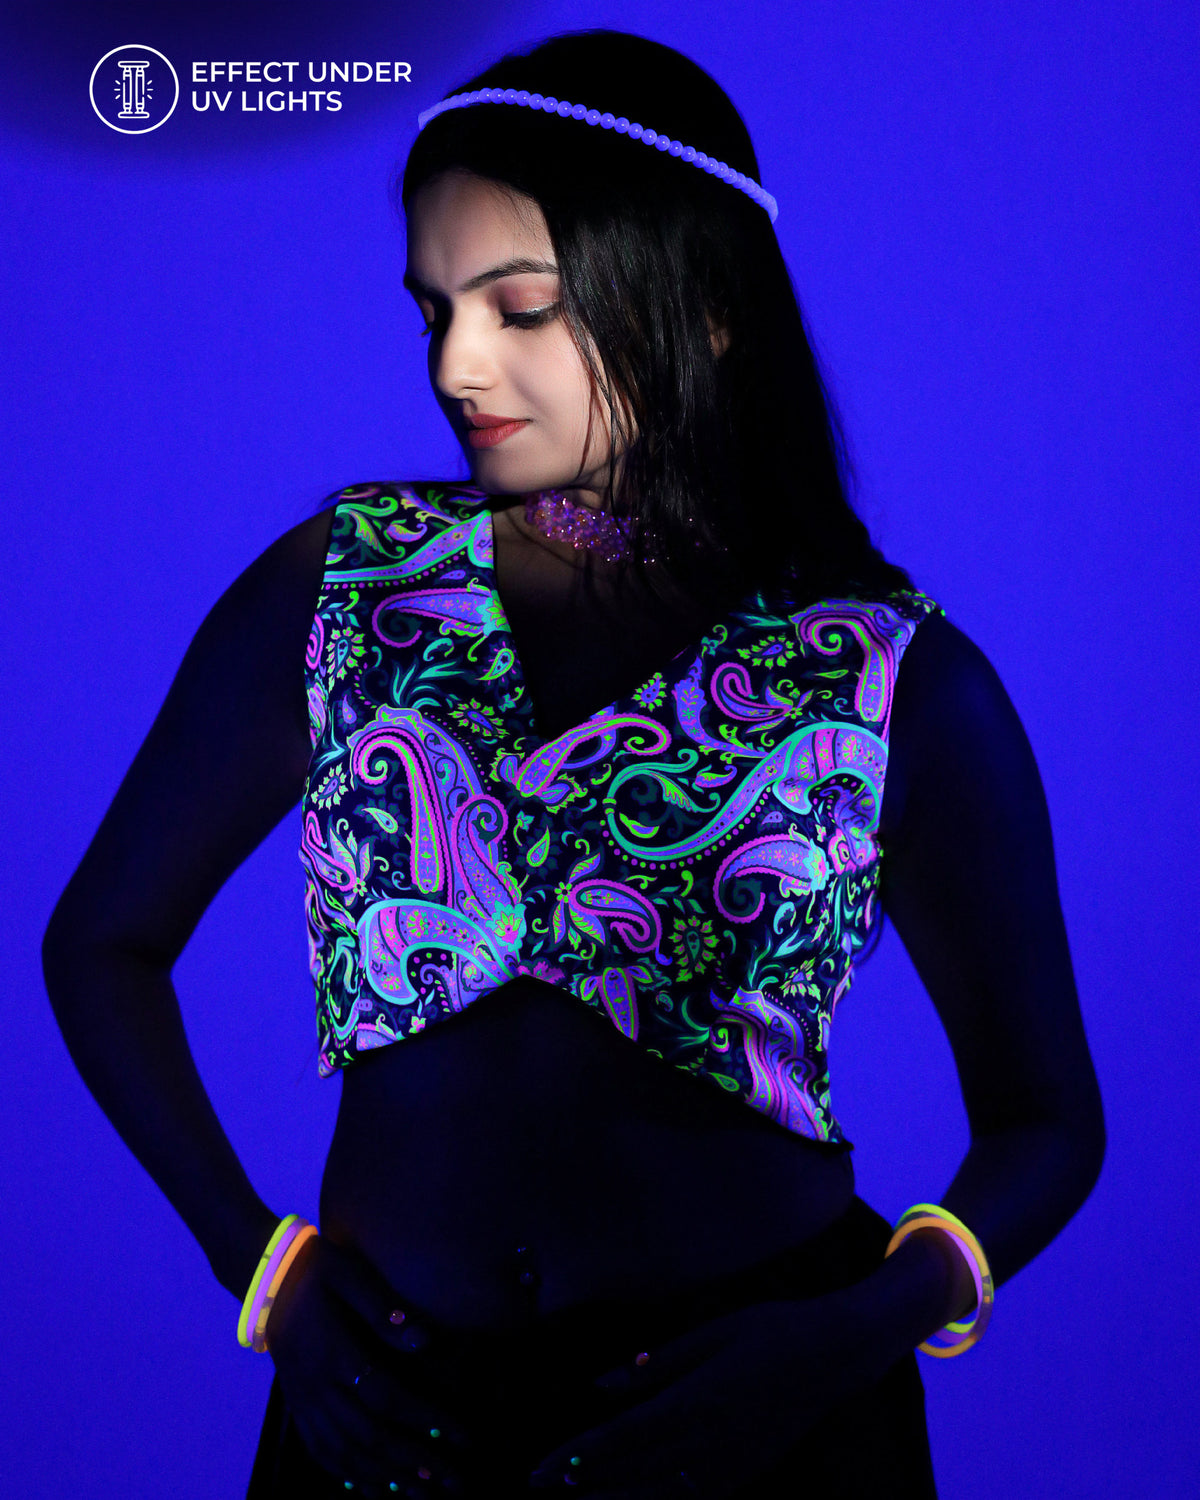 Strike a Pose In Neon: Paisley Print Blouse